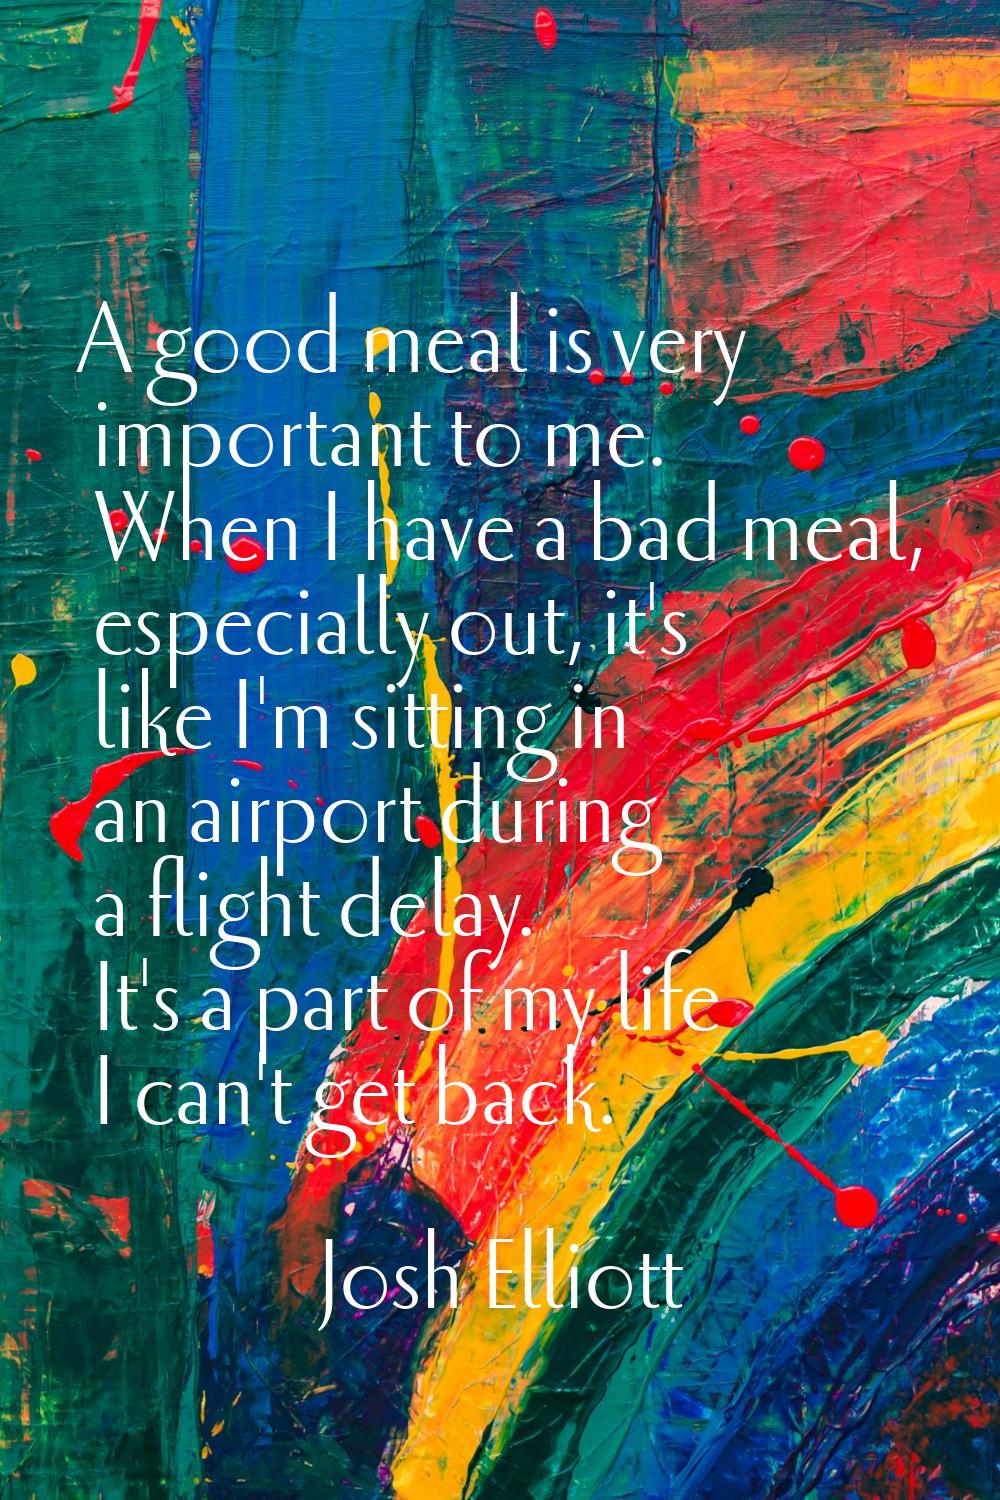 A good meal is very important to me. When I have a bad meal, especially out, it's like I'm sitting 